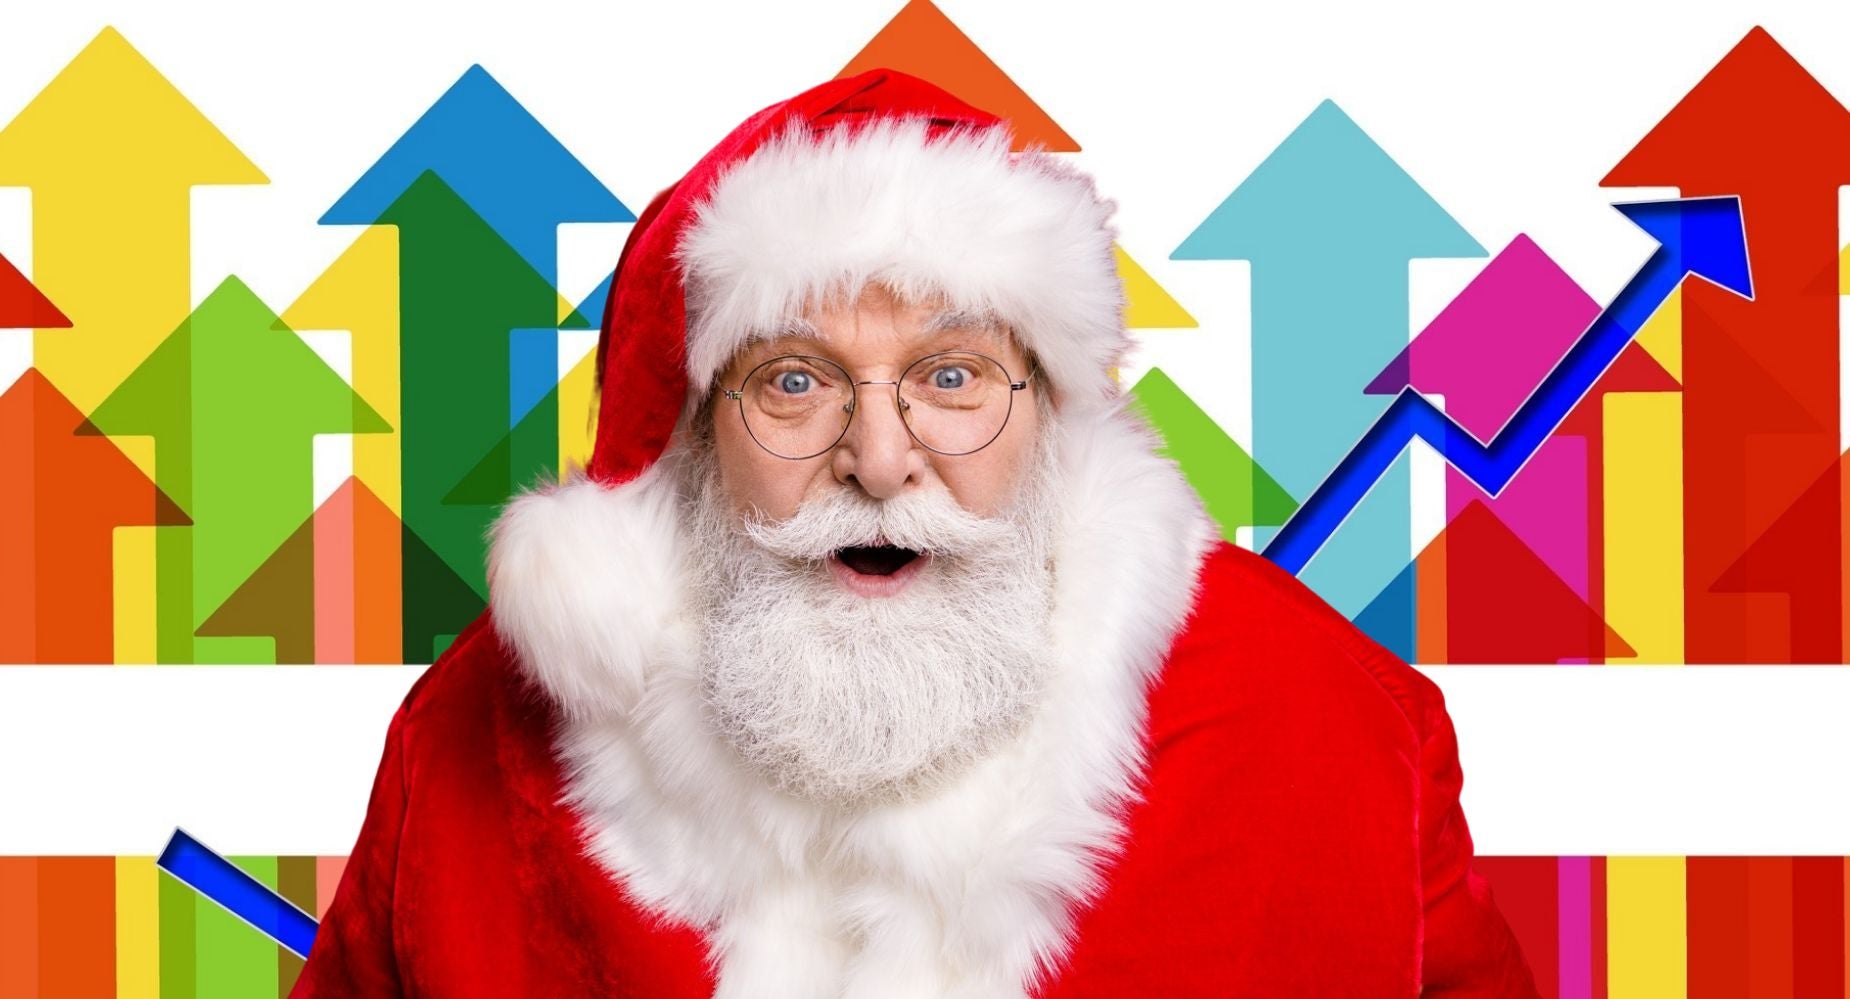 Telco Spark launches the most techie 'Santa' this Christmas - MARKETECH APAC